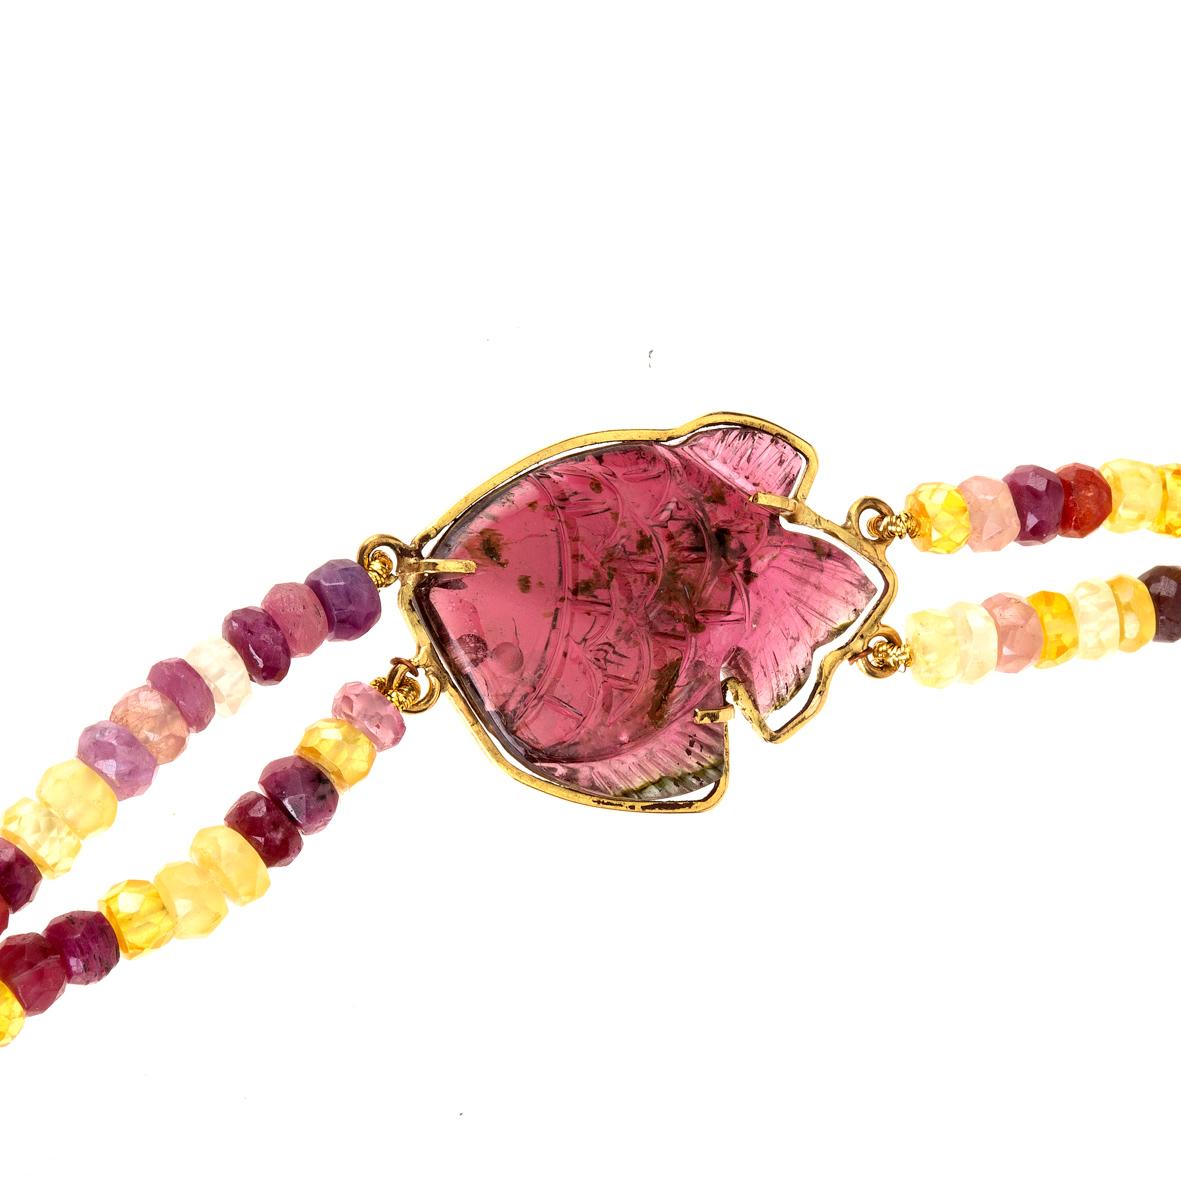 Necklace faced tourmaline pink and yellow gold fish  in carved tourmaline  pink color ct 14,50,  18kt gold gr. 12,00.
All Giulia Colussi jewelry is new and has never been previously owned or worn. Each item will arrive at your door beautifully gift